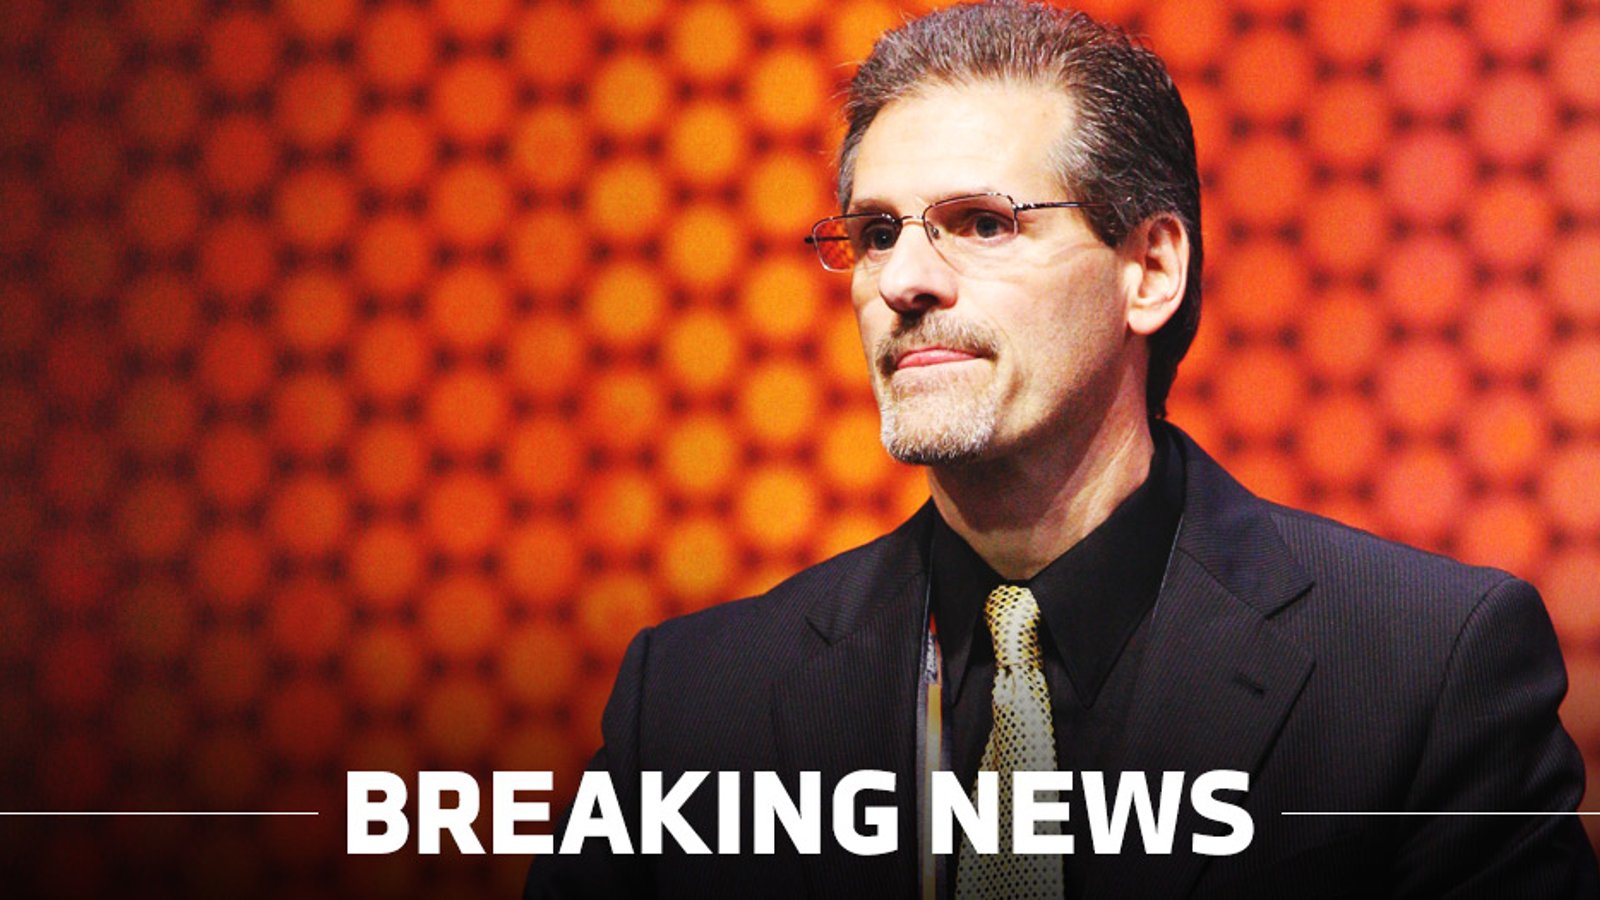 General manager Ron Hextall addresses the controversy around his team.